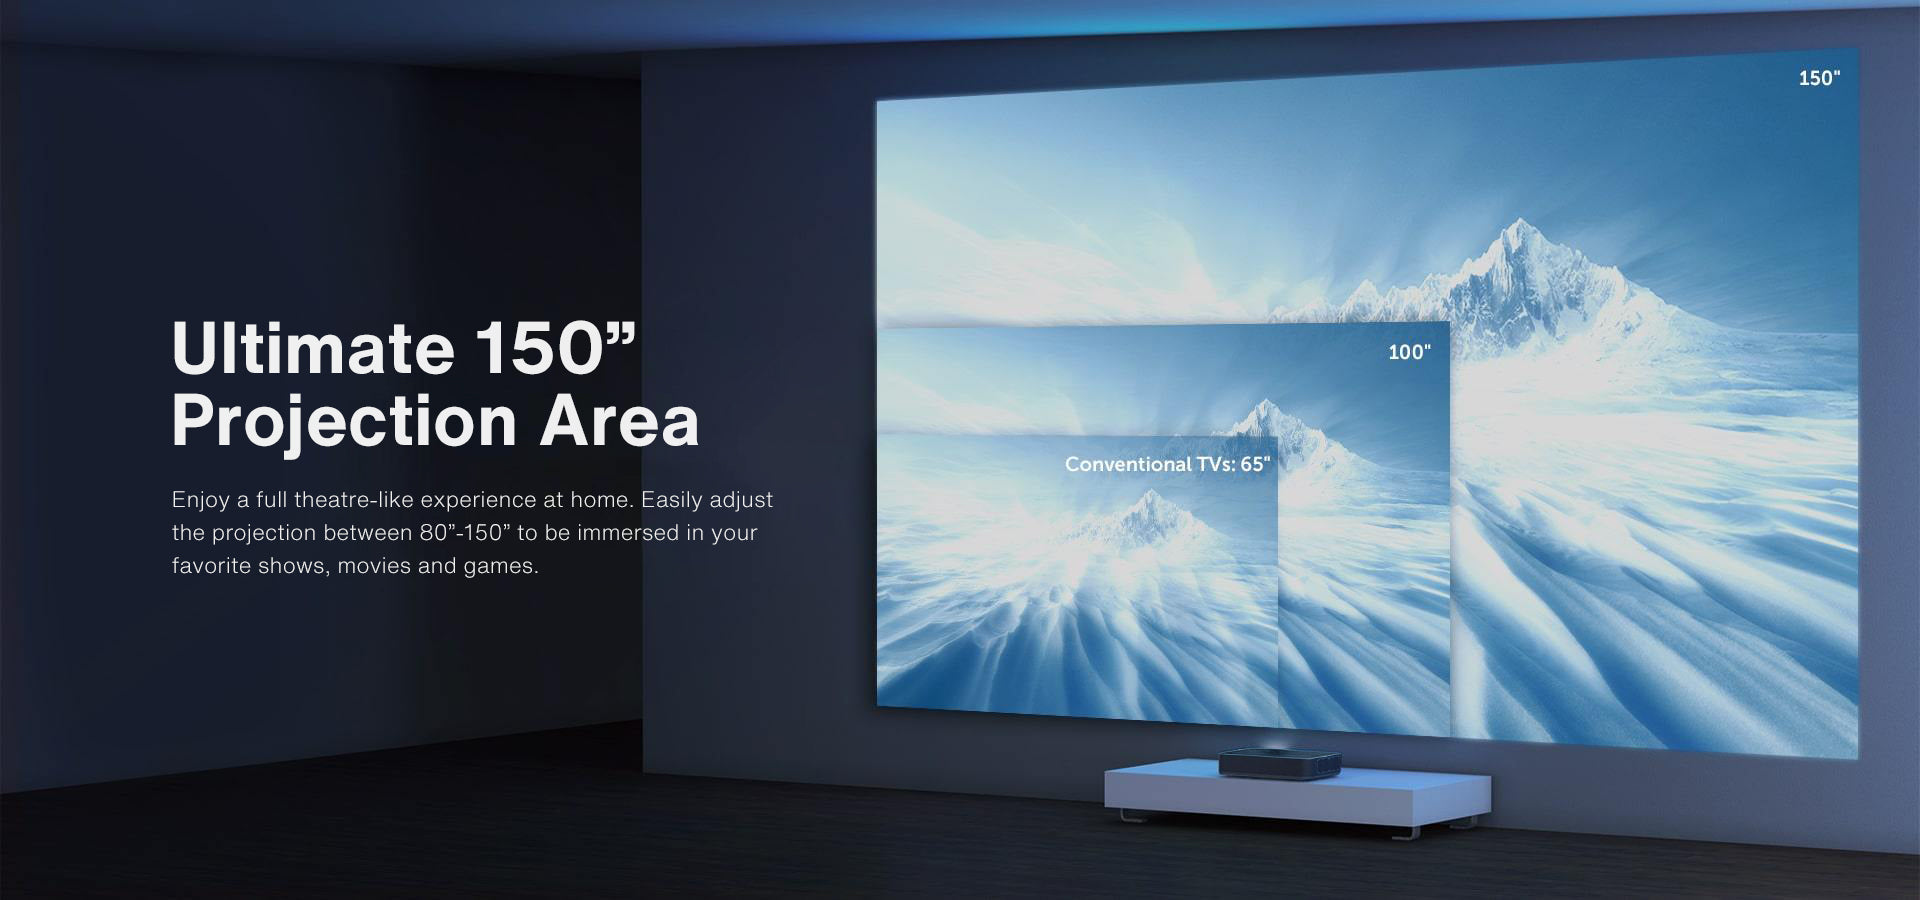 Ultimate 150'' Projection Area Enjoy a full theatre-like experience at home. Easily adjust the protection between 80'' - 150'' to be immersed in your favorite shows, movies and games.